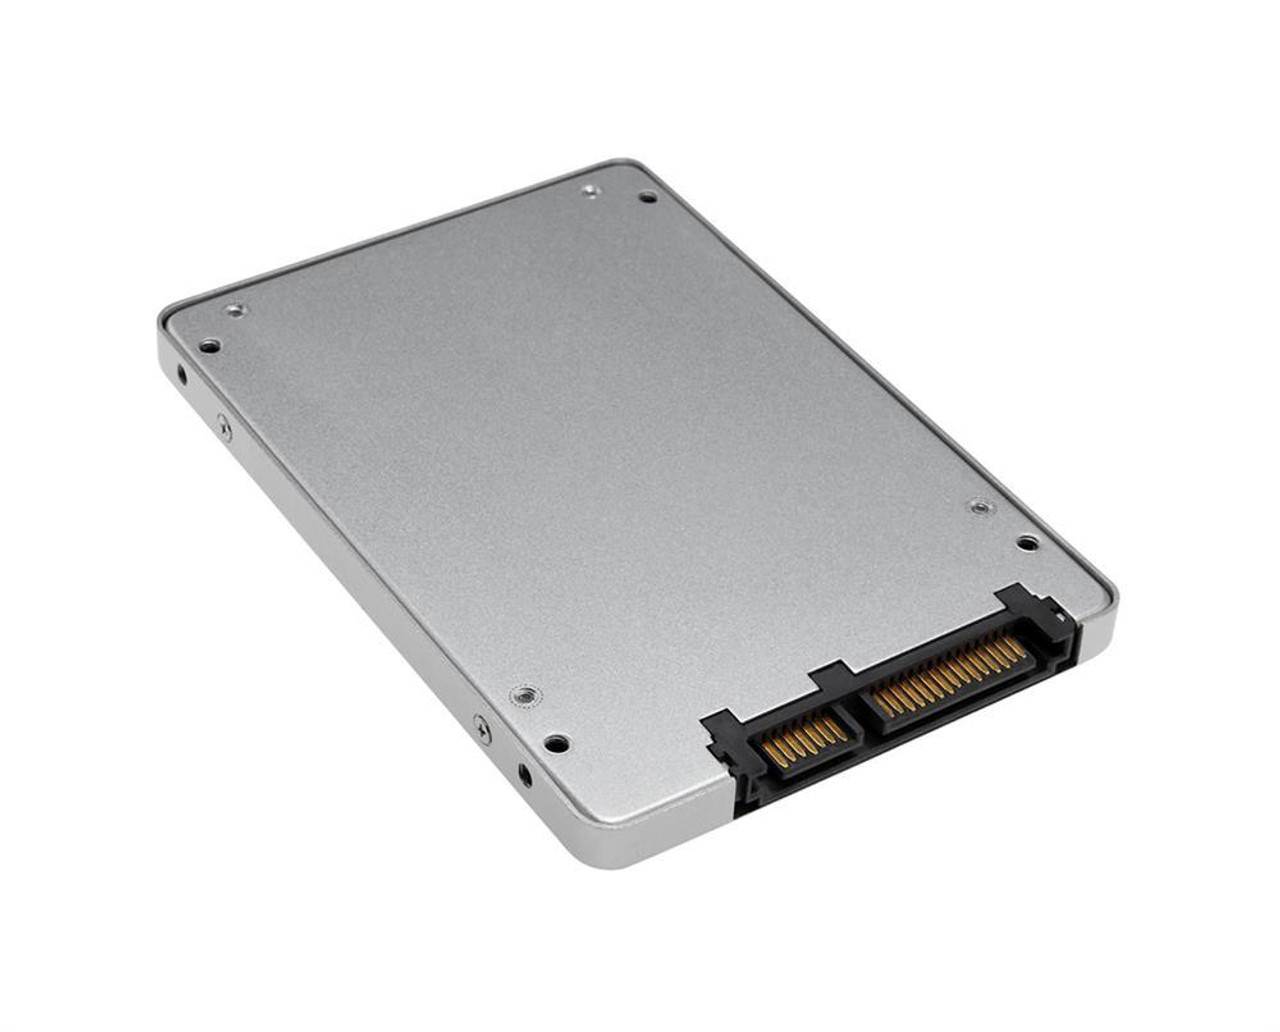 03B01-00020200 ASUS 256GB MLC SATA 6Gbps 2.5-inch Internal Solid State Drive (SSD)